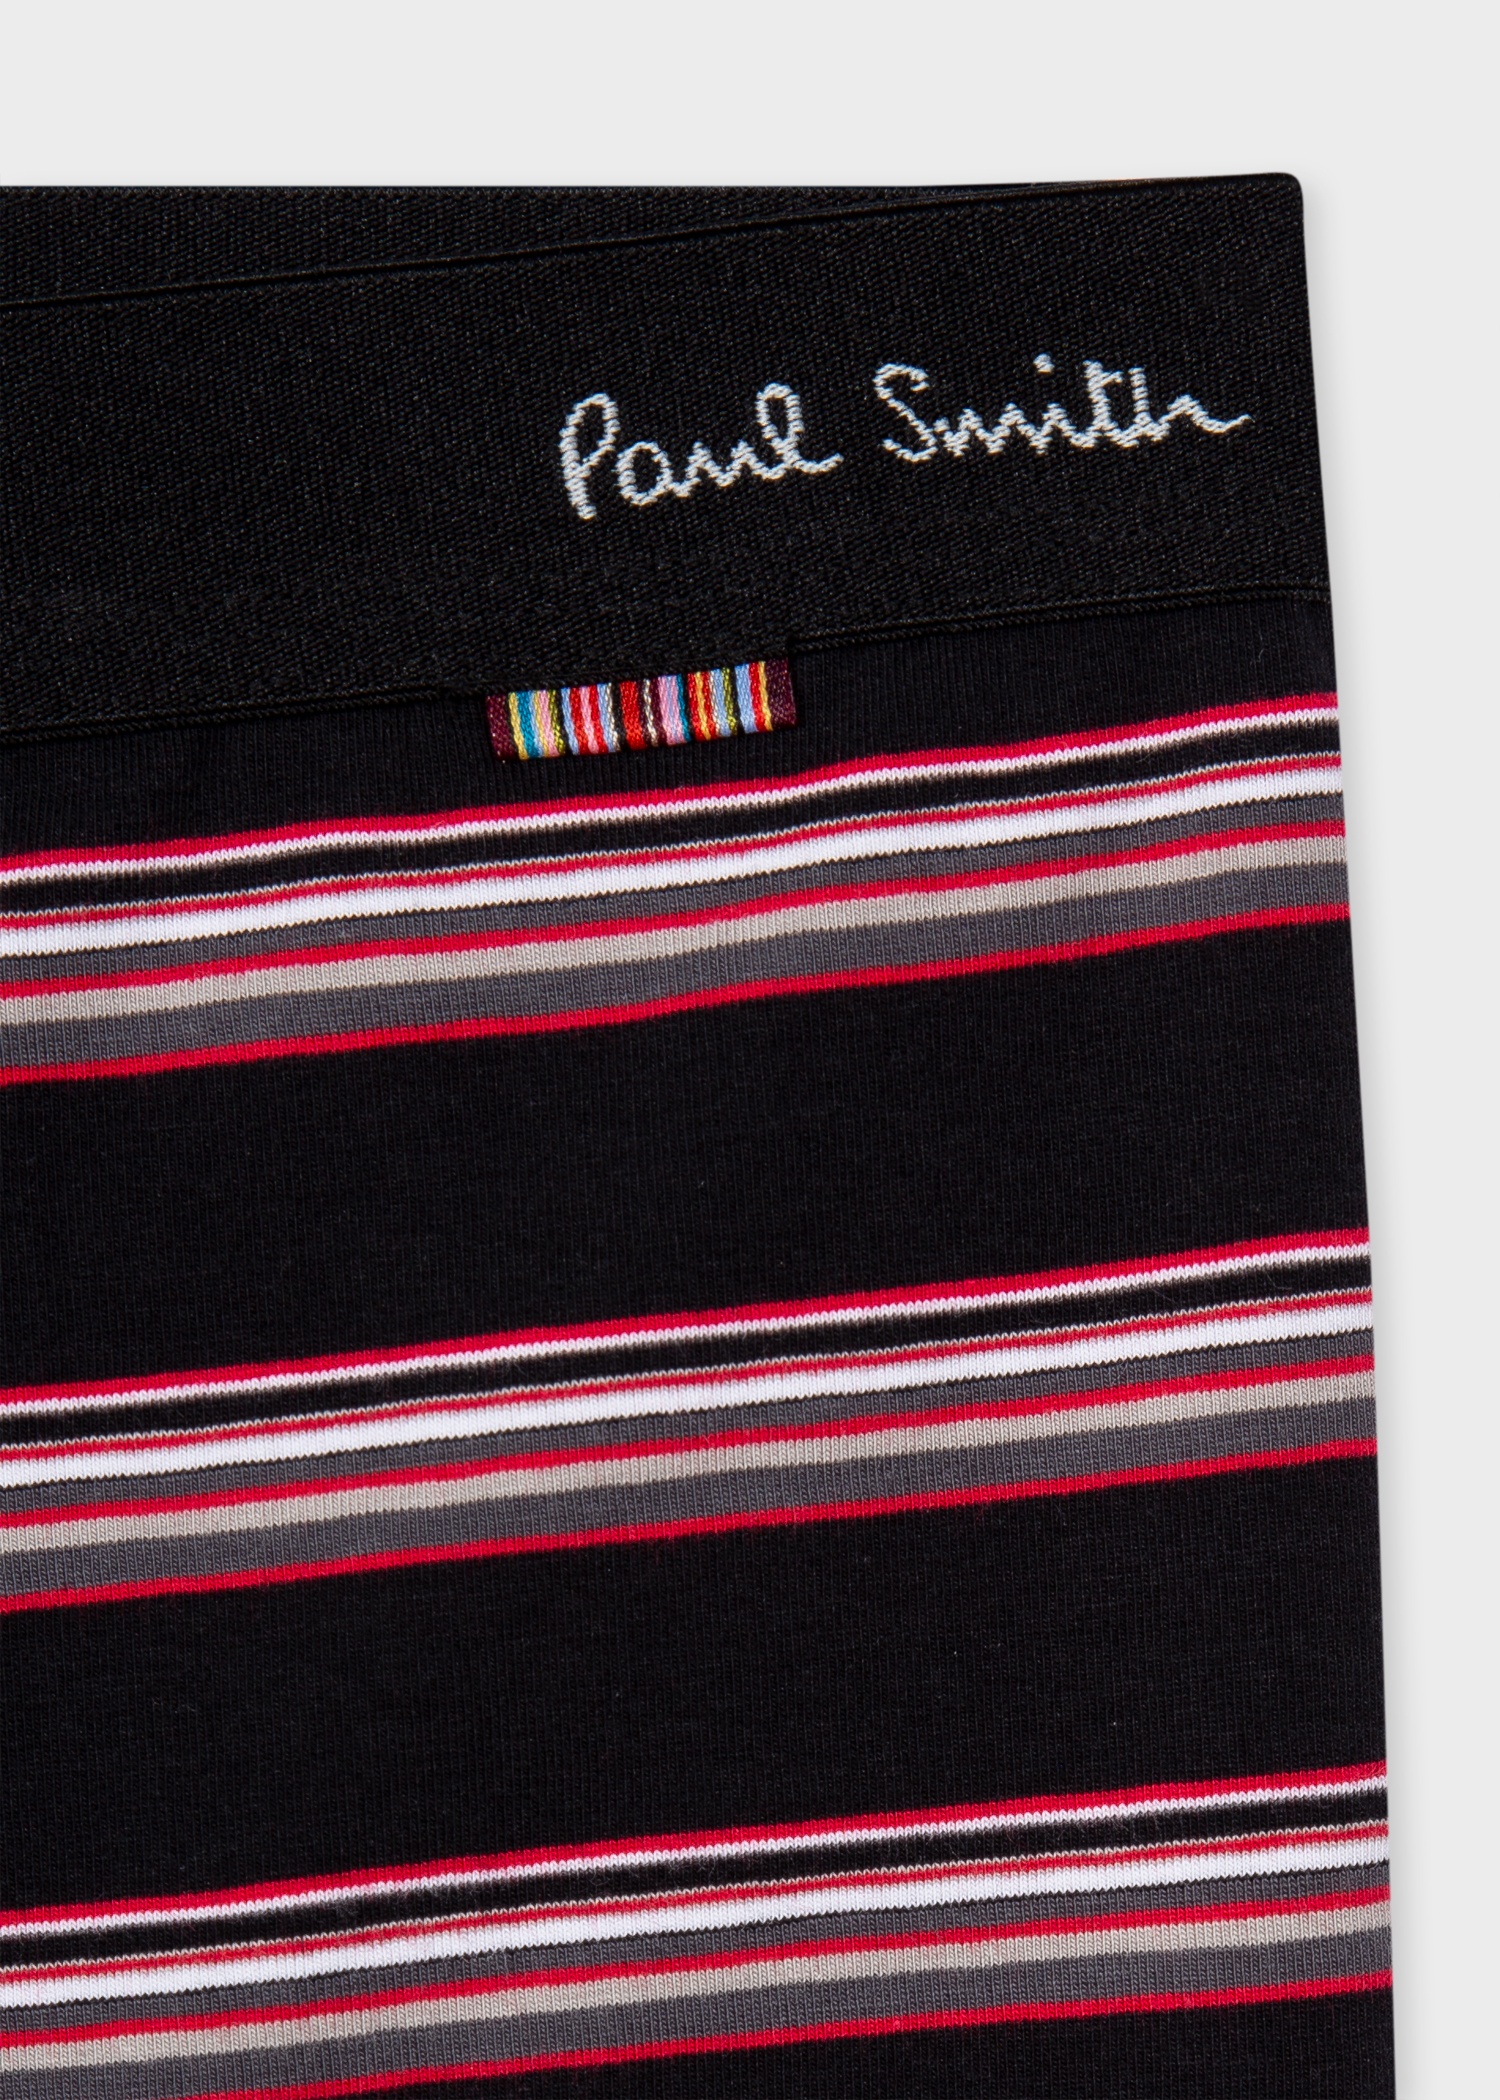 Paul Smith & Manchester United - Low-Rise Boxer Briefs - 2